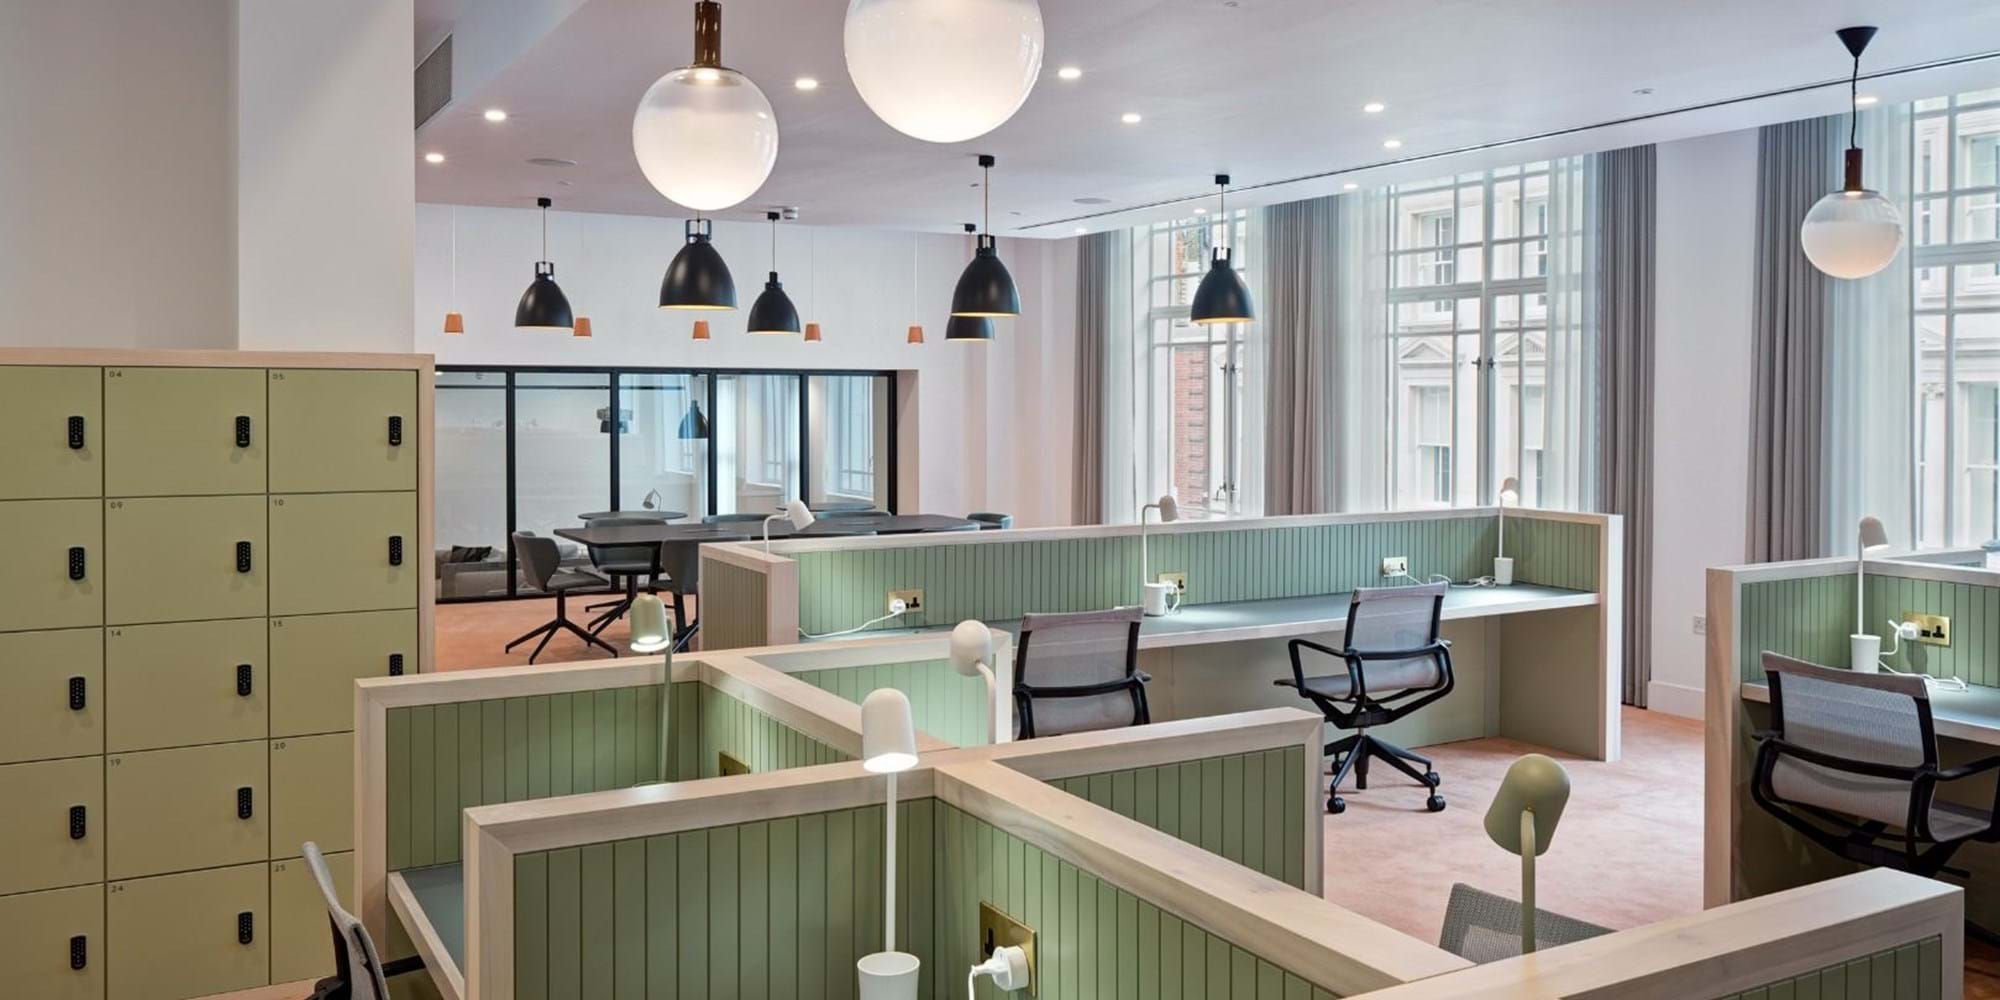 Modus Workspace office design, fit out and refurbishment - TOG - Wimpole Street - TOG Wimpole St 08 highres sRGB.jpg